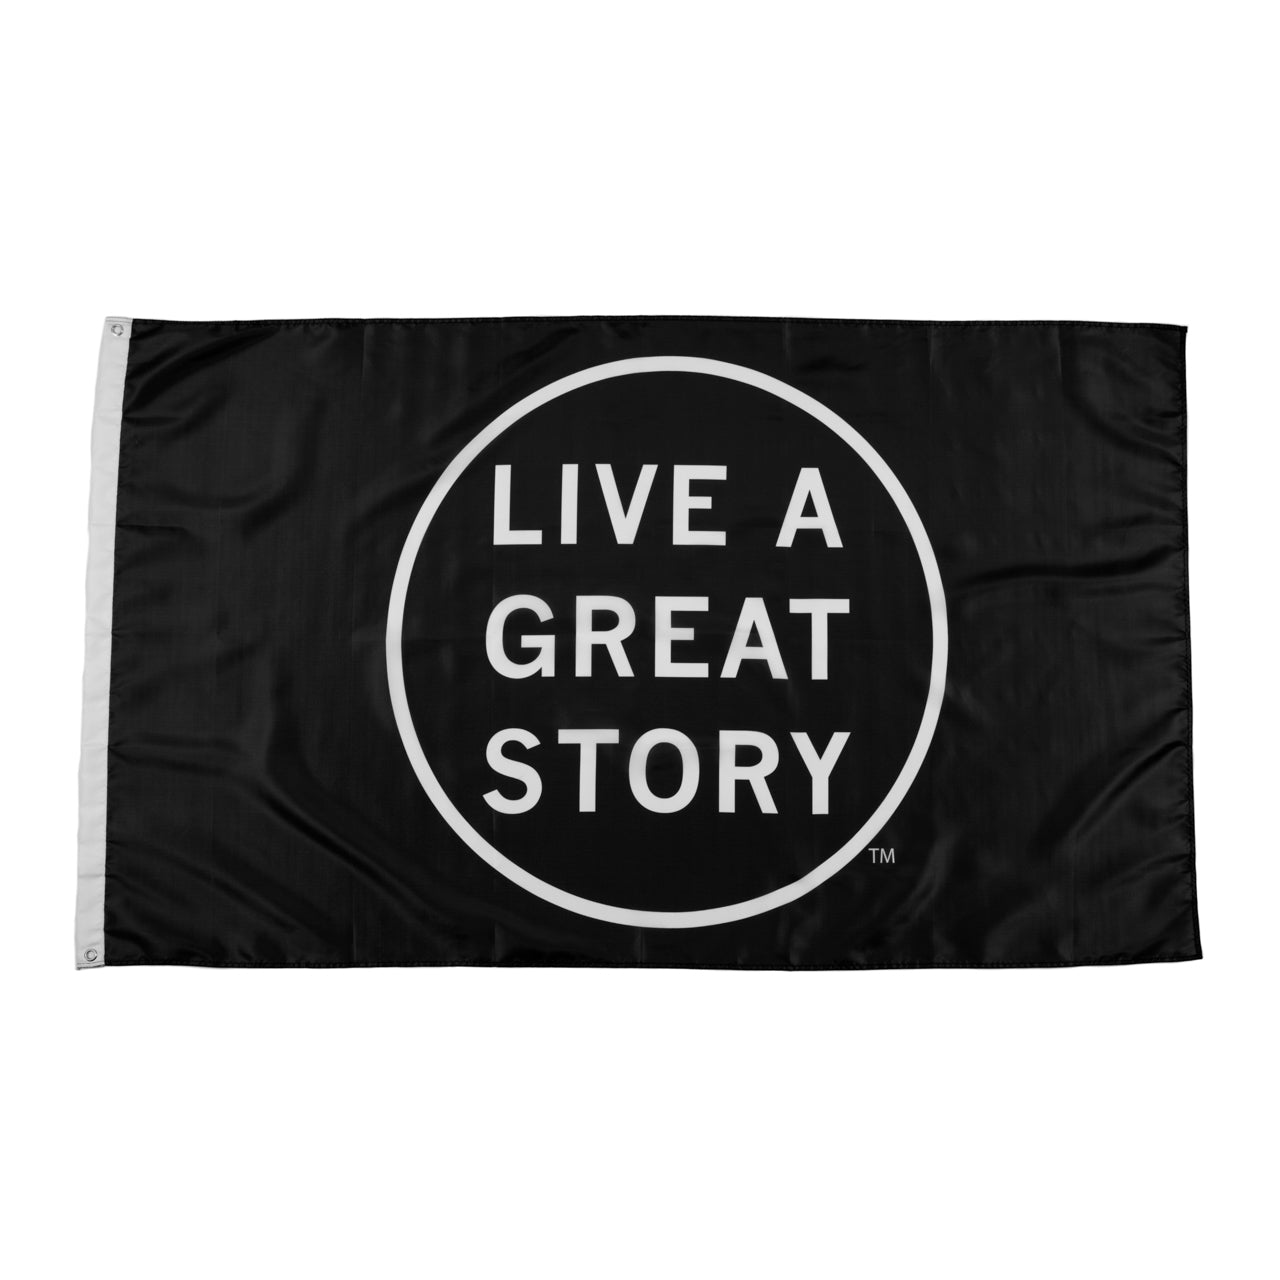 A black LIVE A GREAT STORY Adventure Flag